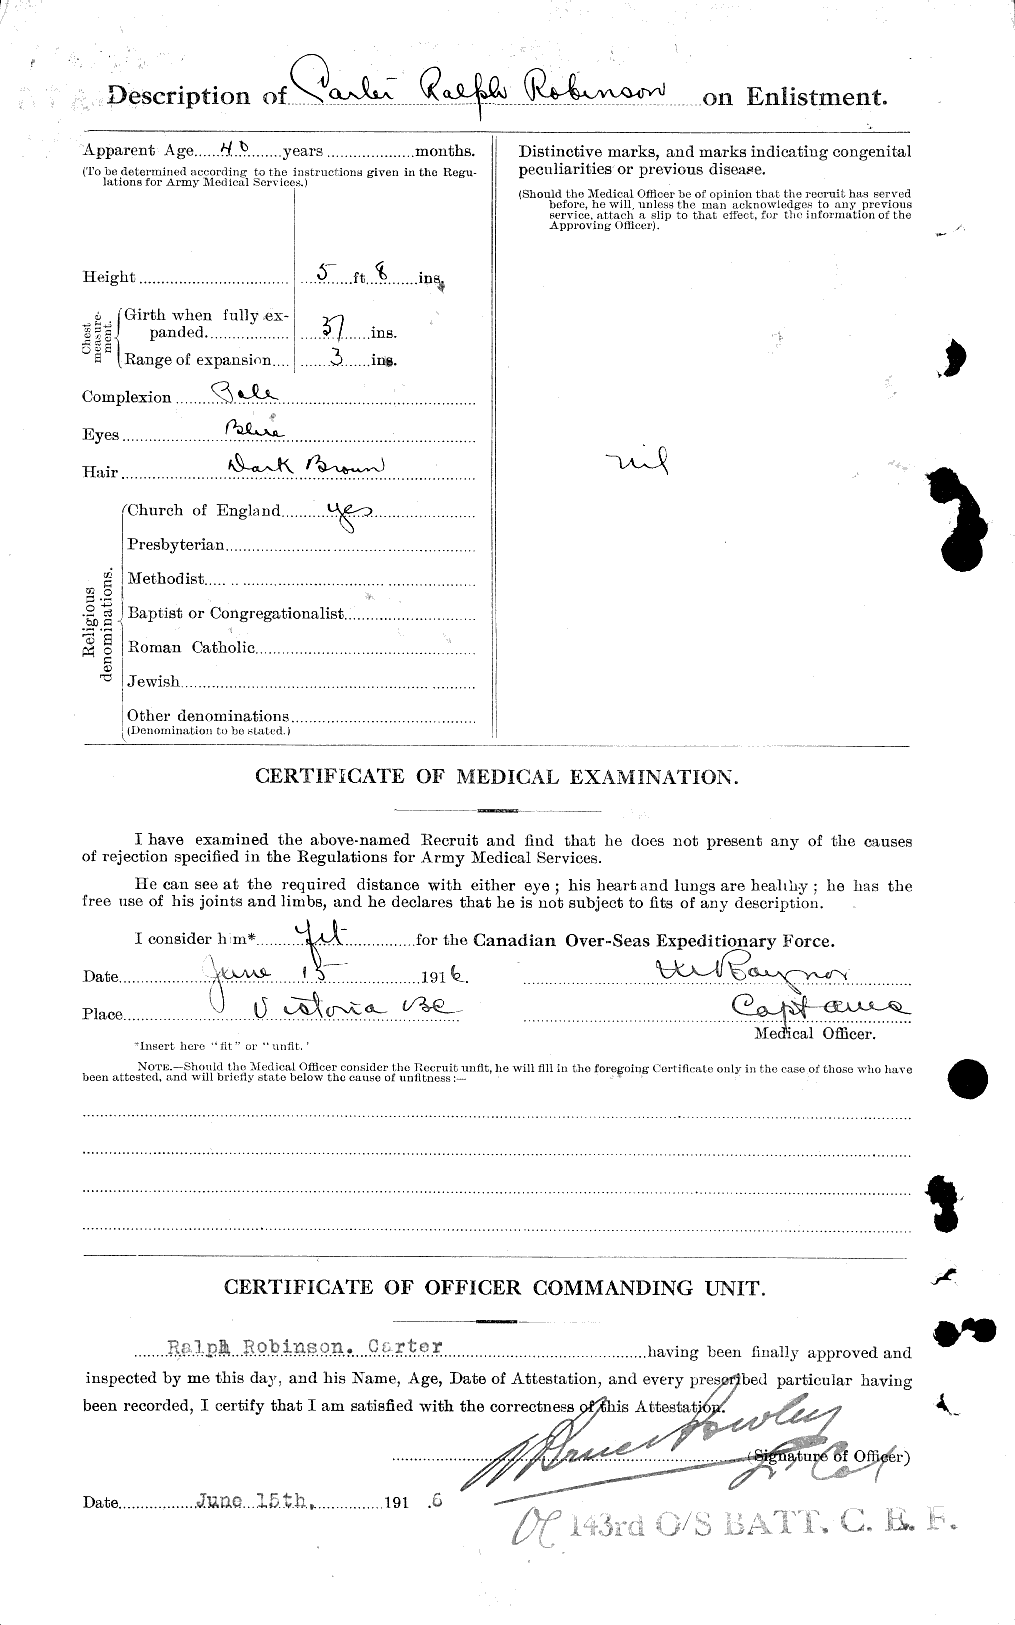 Personnel Records of the First World War - CEF 006132b